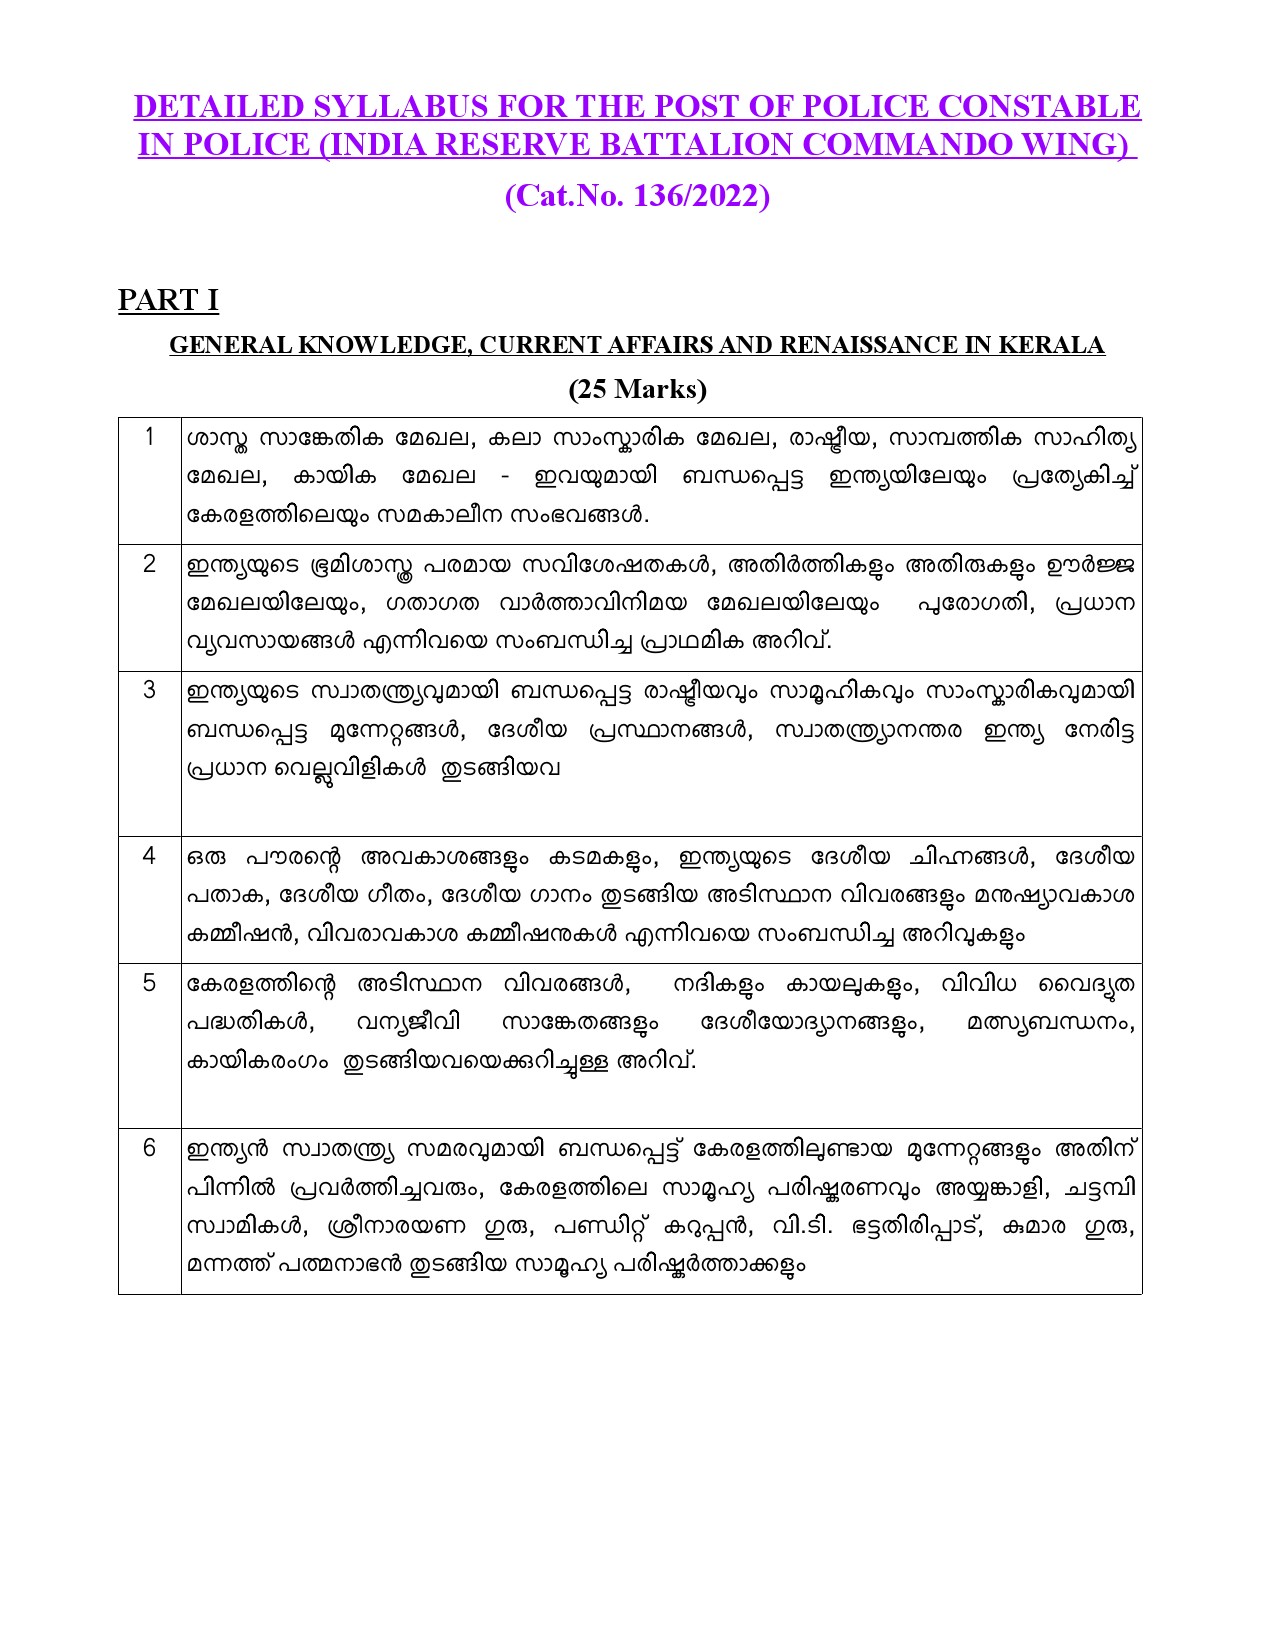 Syllabus For The Post Of Police Constable In Police - Notification Image 1